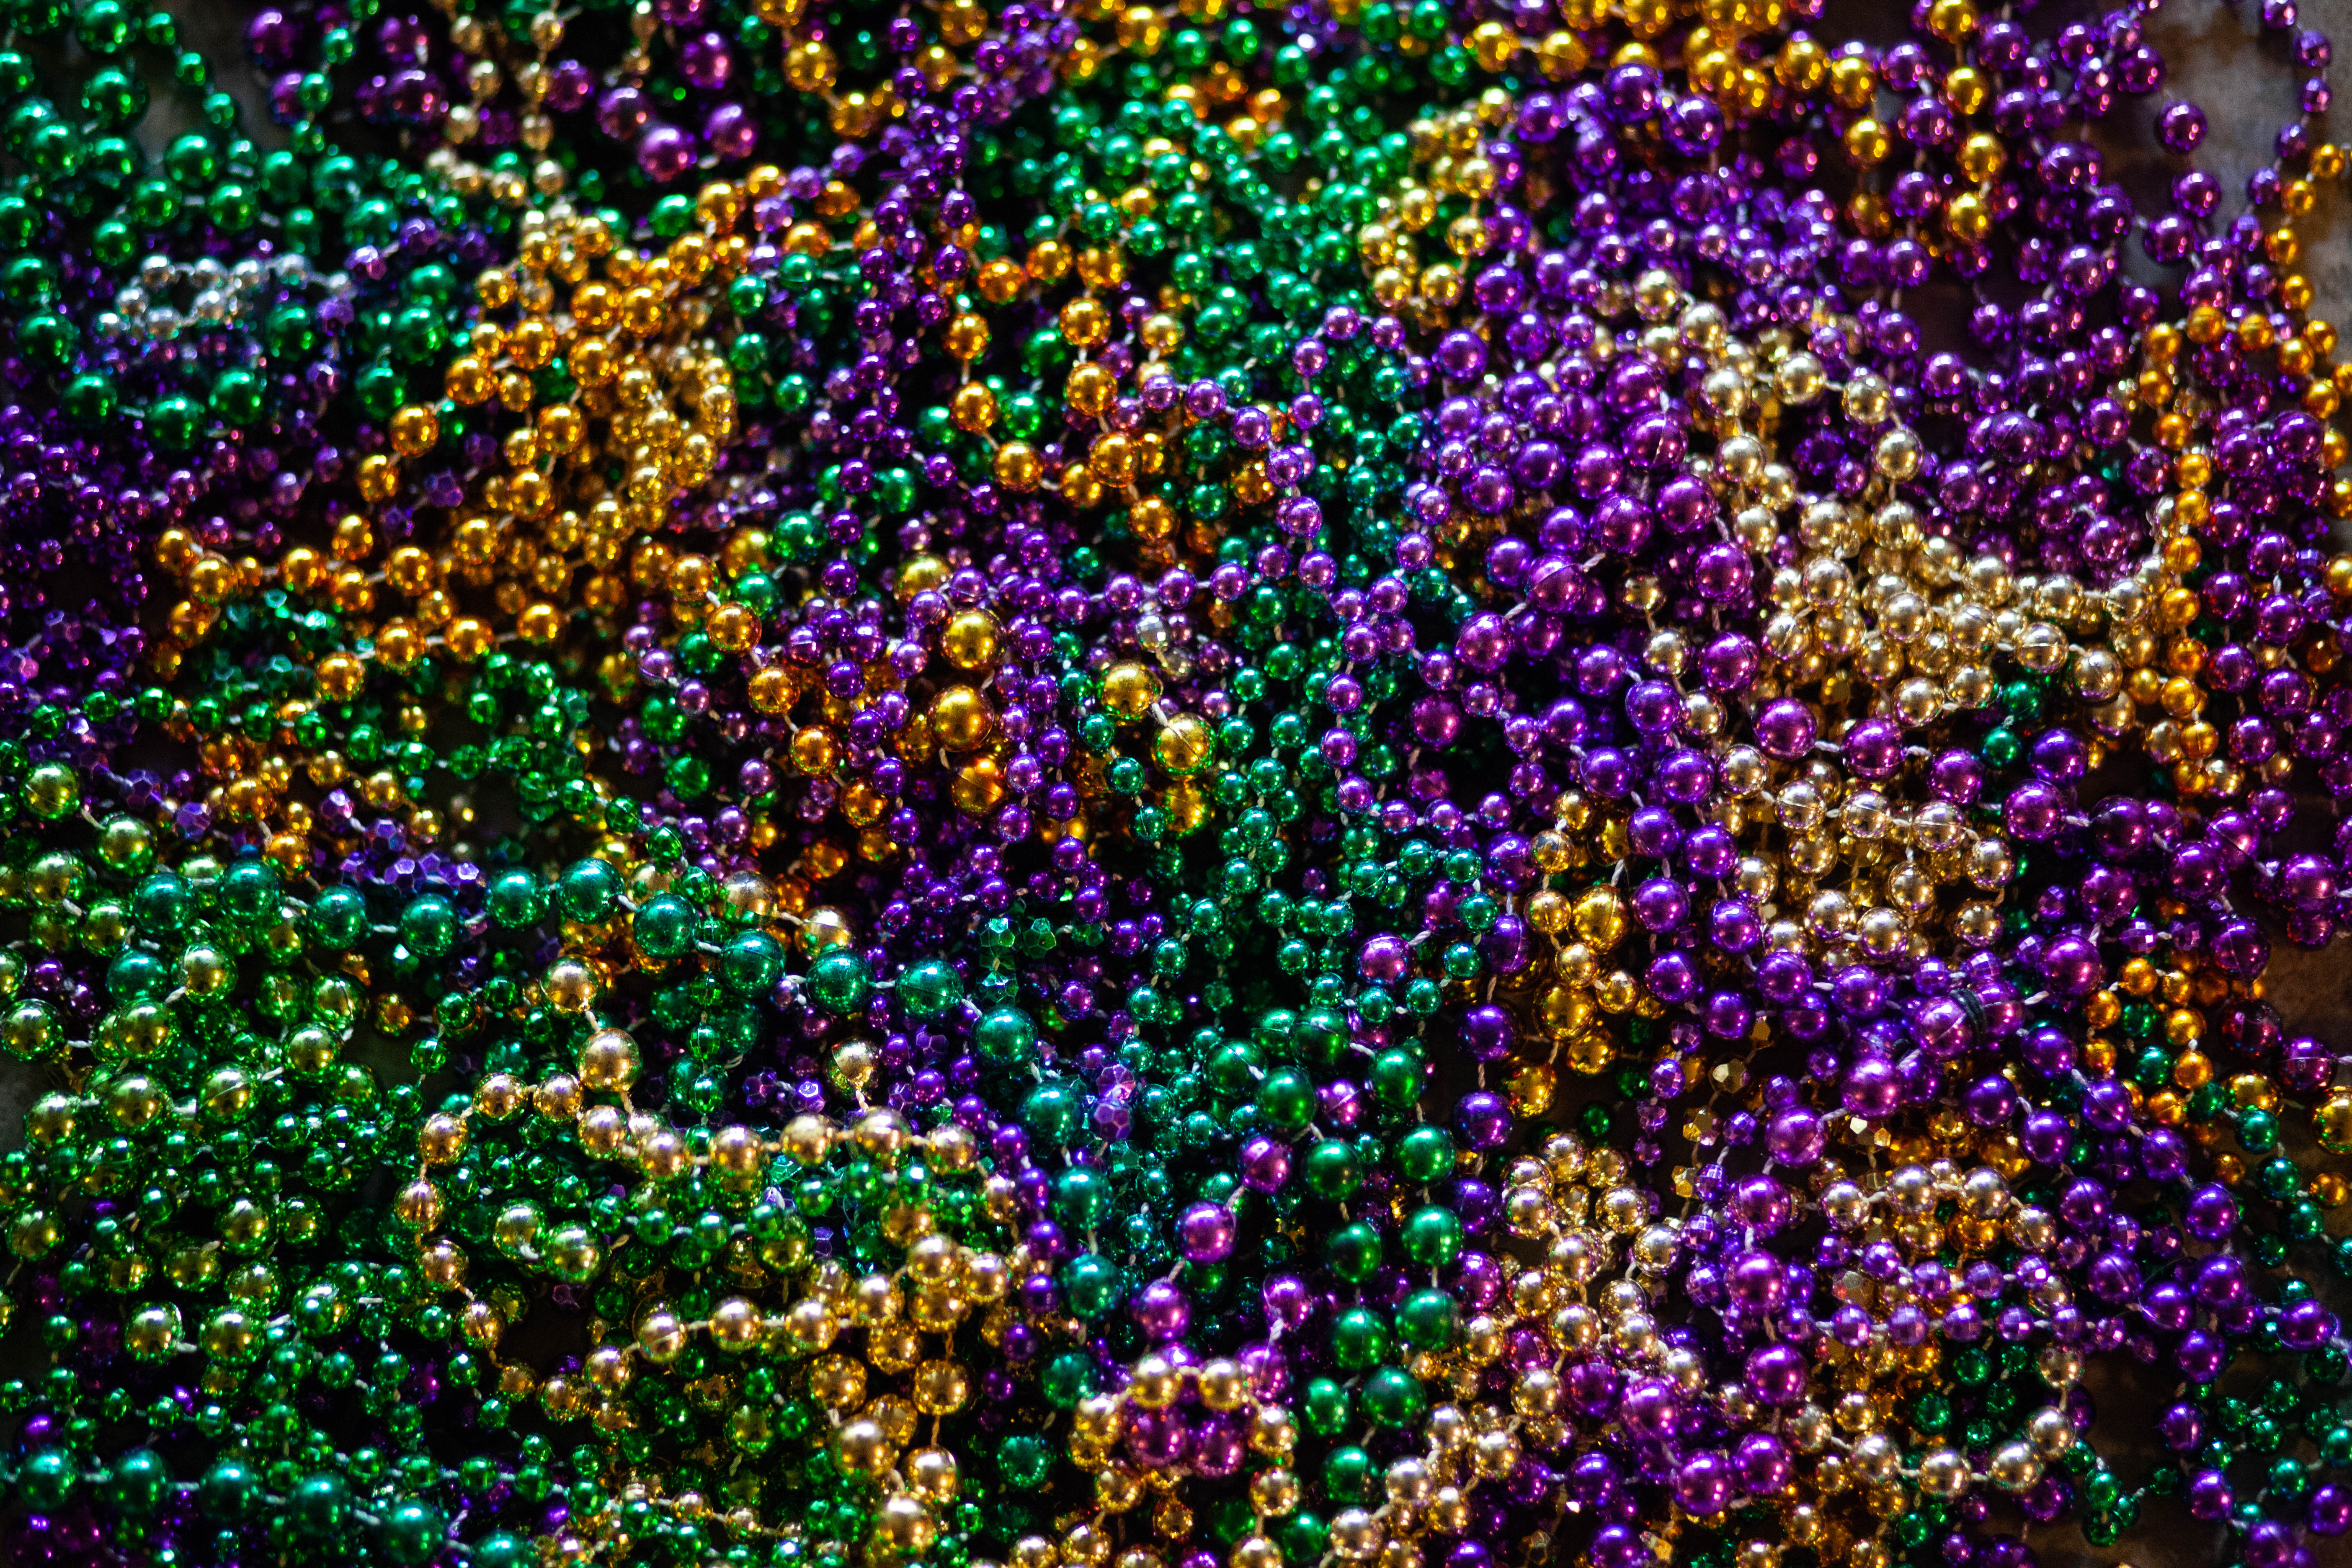 Green, yellow, and purple beaded necklaces in a pile.